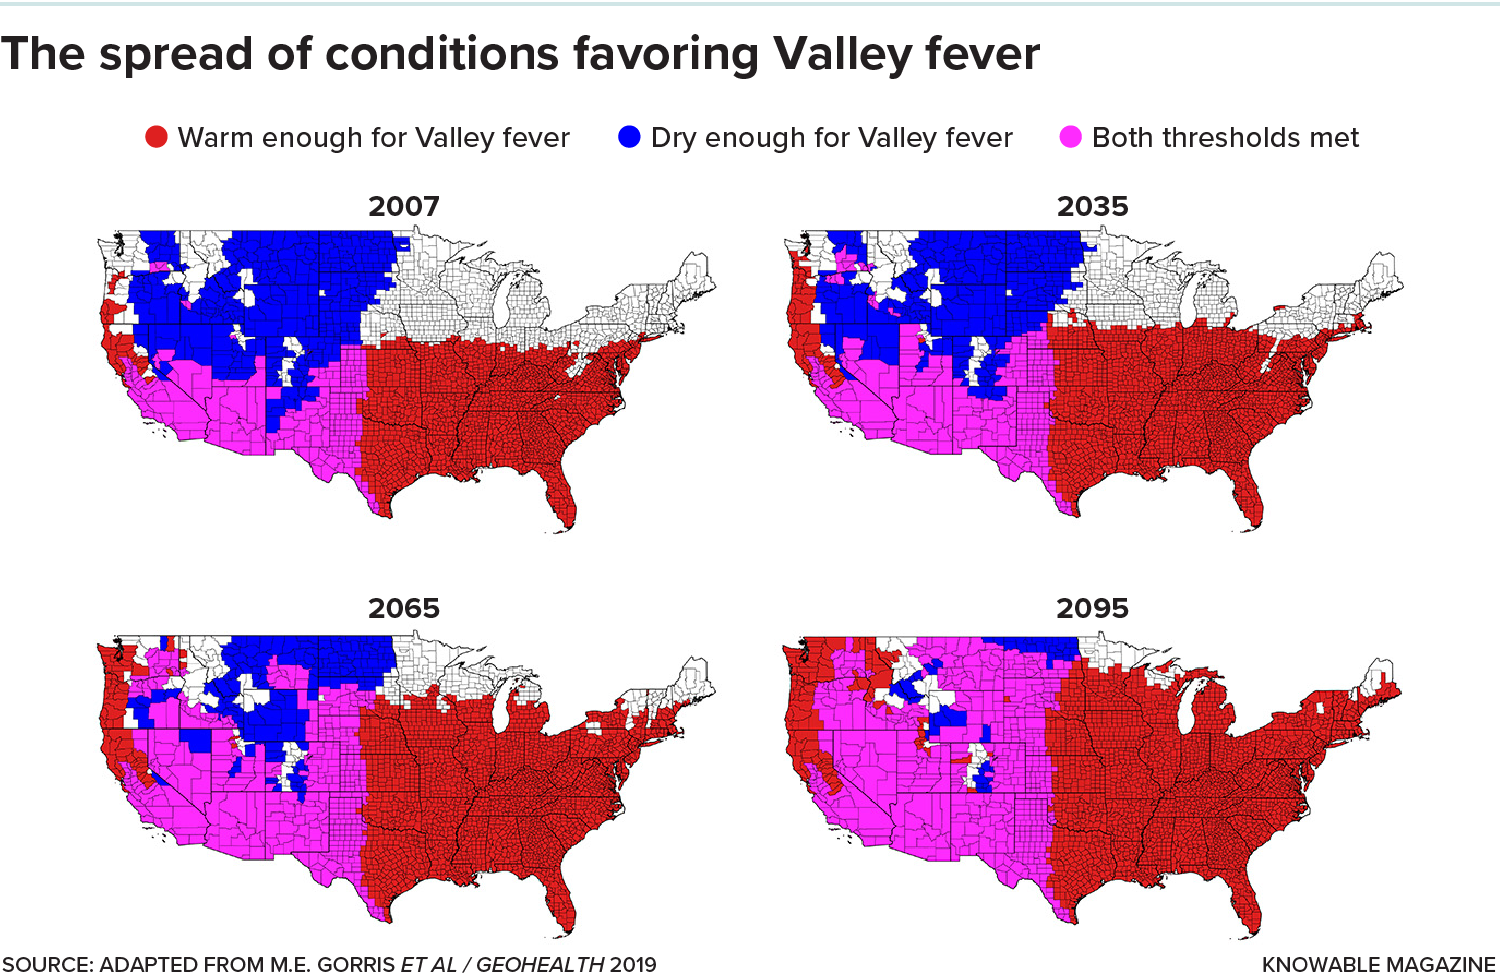 Maps of US showing conditions favorable to Valley fever fungus.